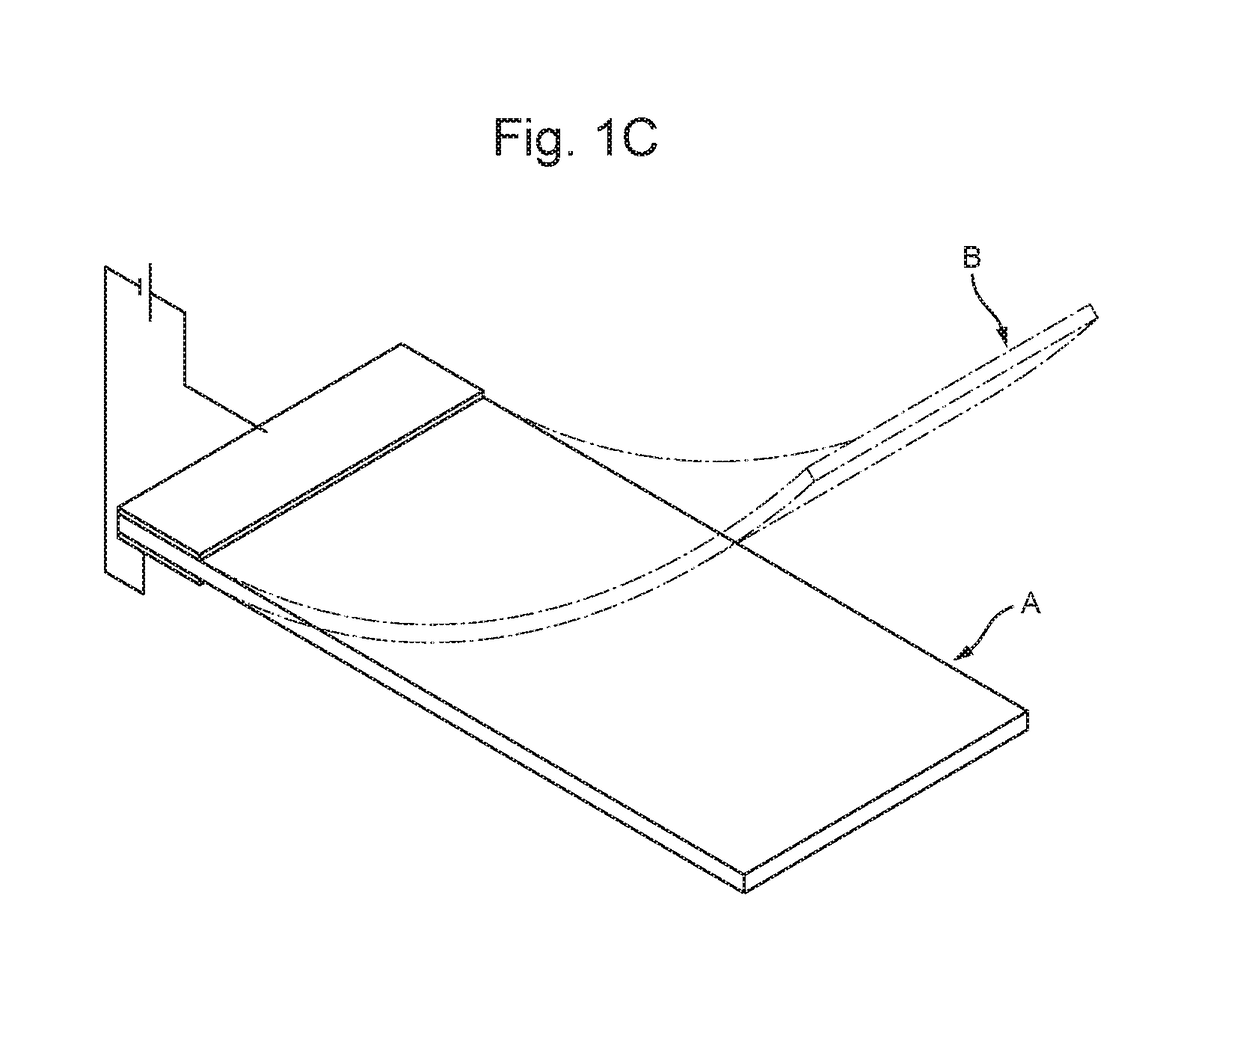 Ionic Capacitive Laminate and Method of Production